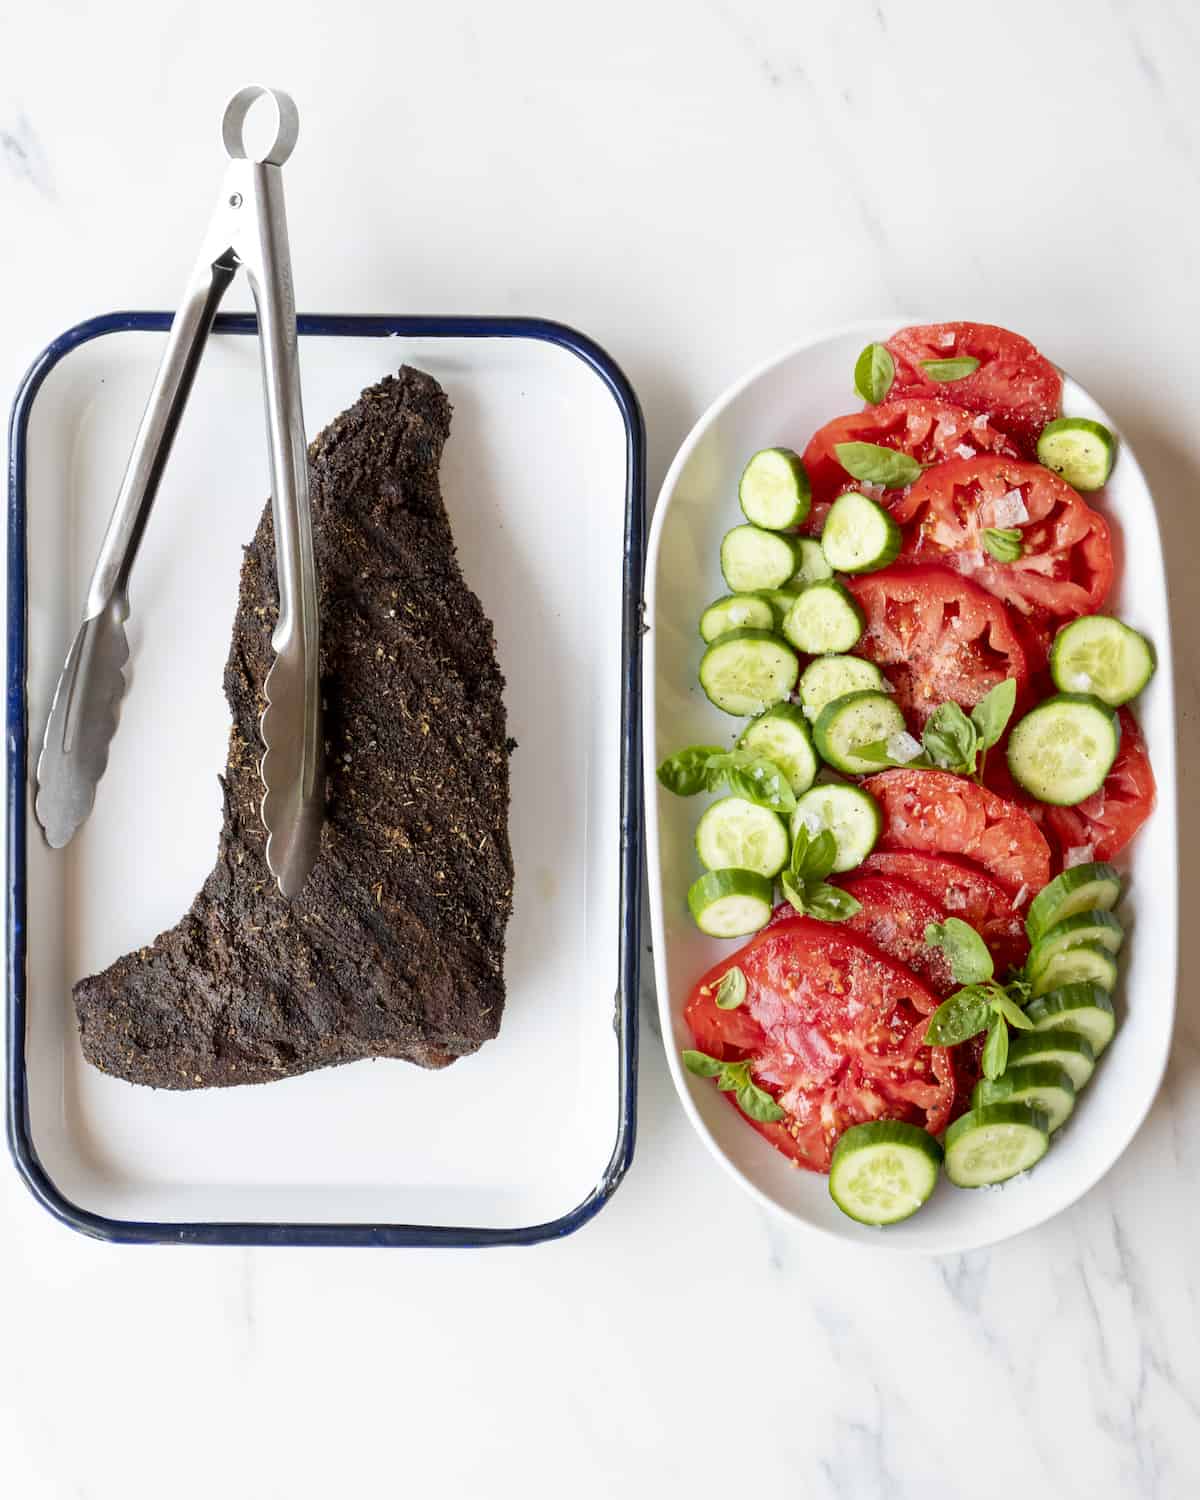 A trip tip that has been seared is sitting in a baking dish next to a dish full of tomatoes basil, and cucumbers.  